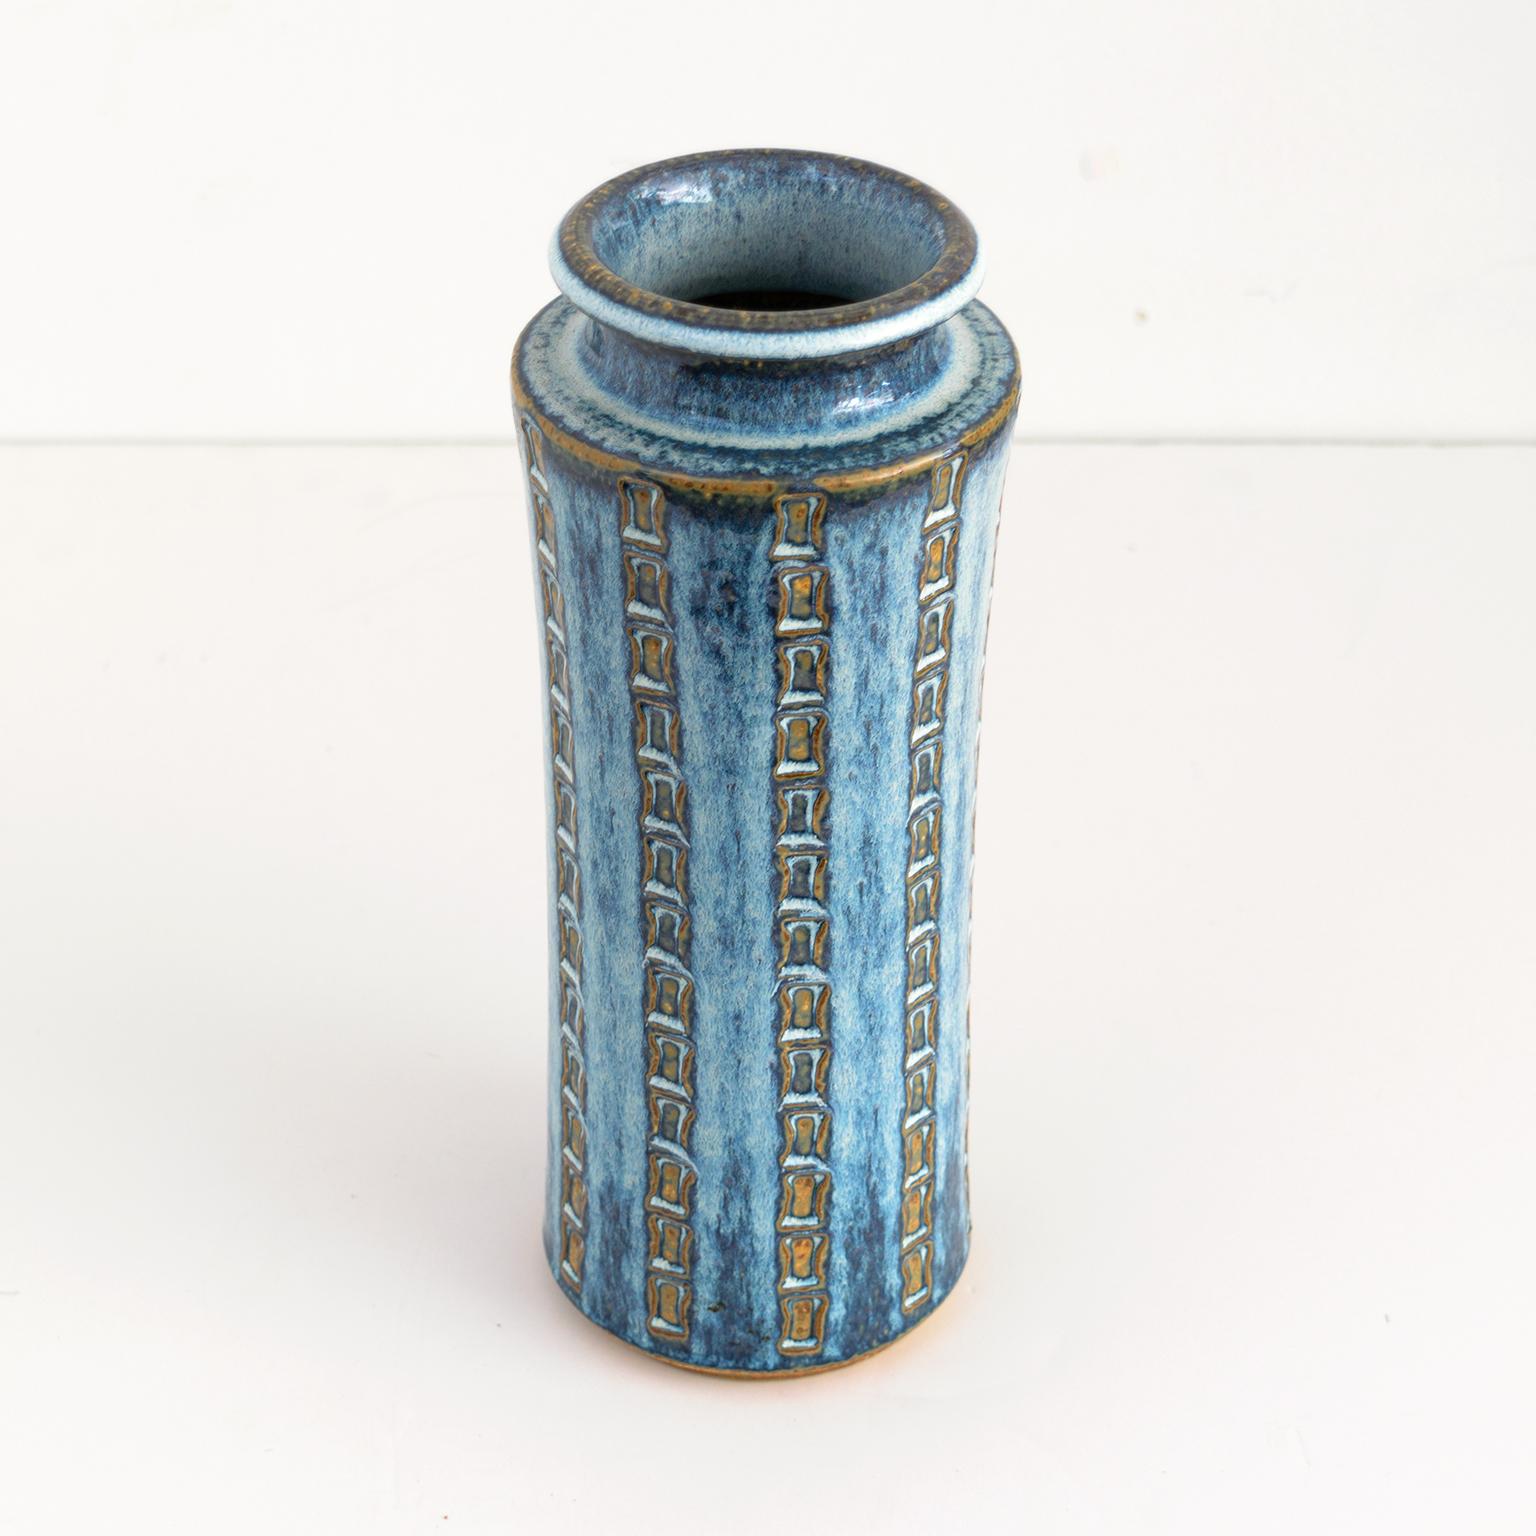 Maria Philippi tall vase with impressed patterns with pale blue glaze over deep blue and brown glazes. Made at Soholm, Denmark. 

Measures: Height: 11.5”. Diameter: 4.5”.